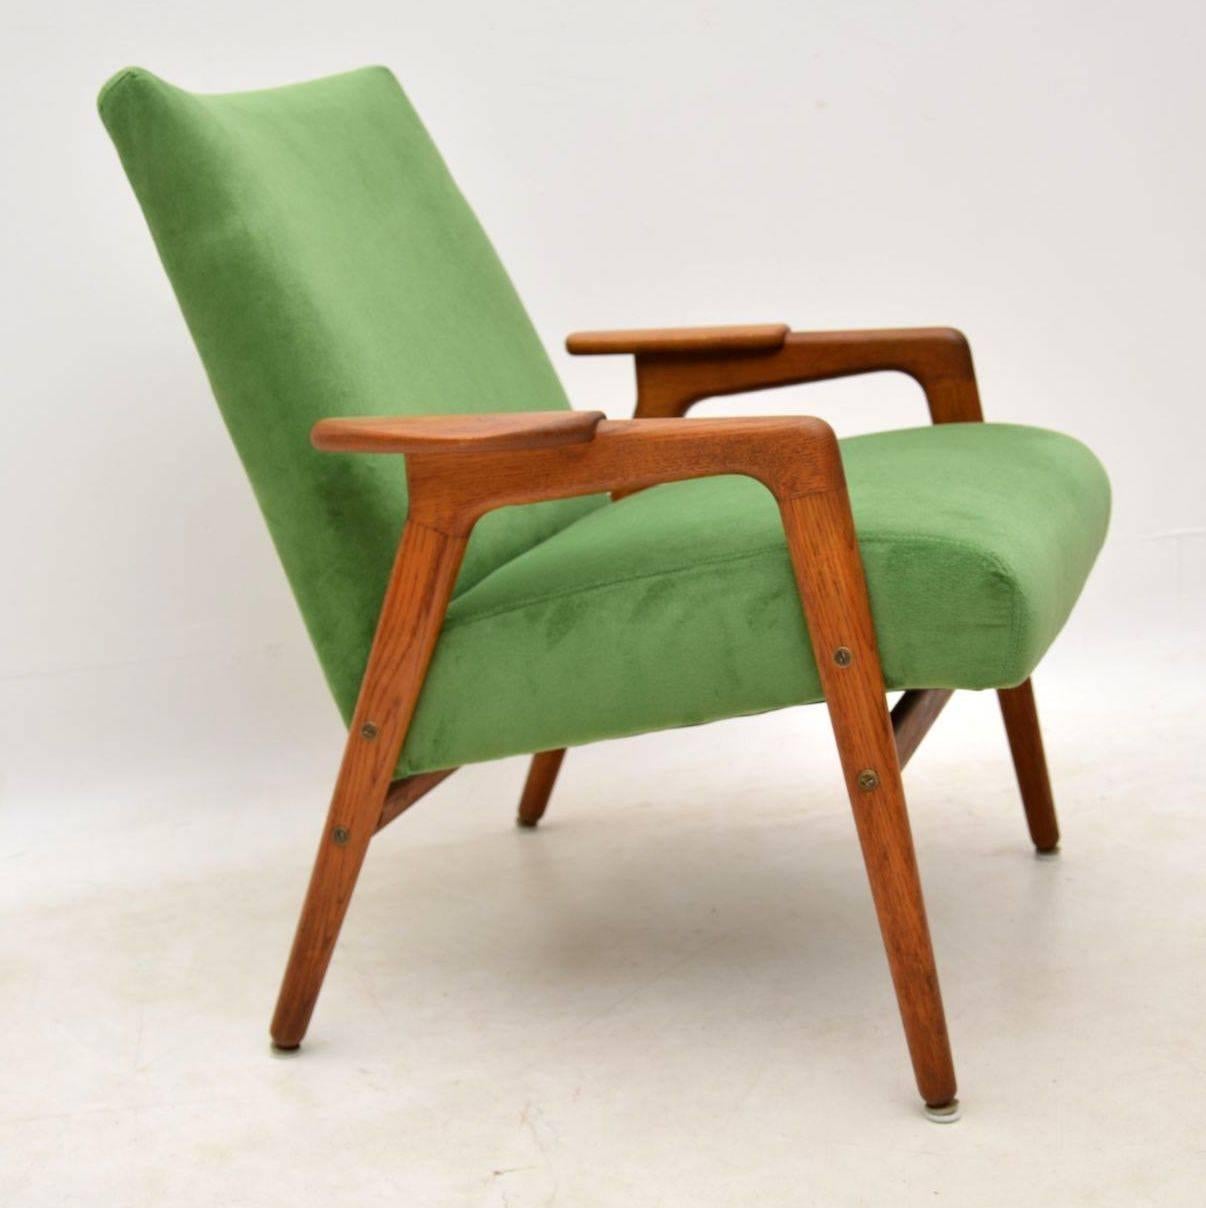 A beautifully designed vintage armchair in Teak, this was made in Sweden during the 1960s, it was designed by Yngve Ekstrom and this model is called the 'Ruster' chair. The condition is great for its age, the frame is clean, sturdy and sound, with